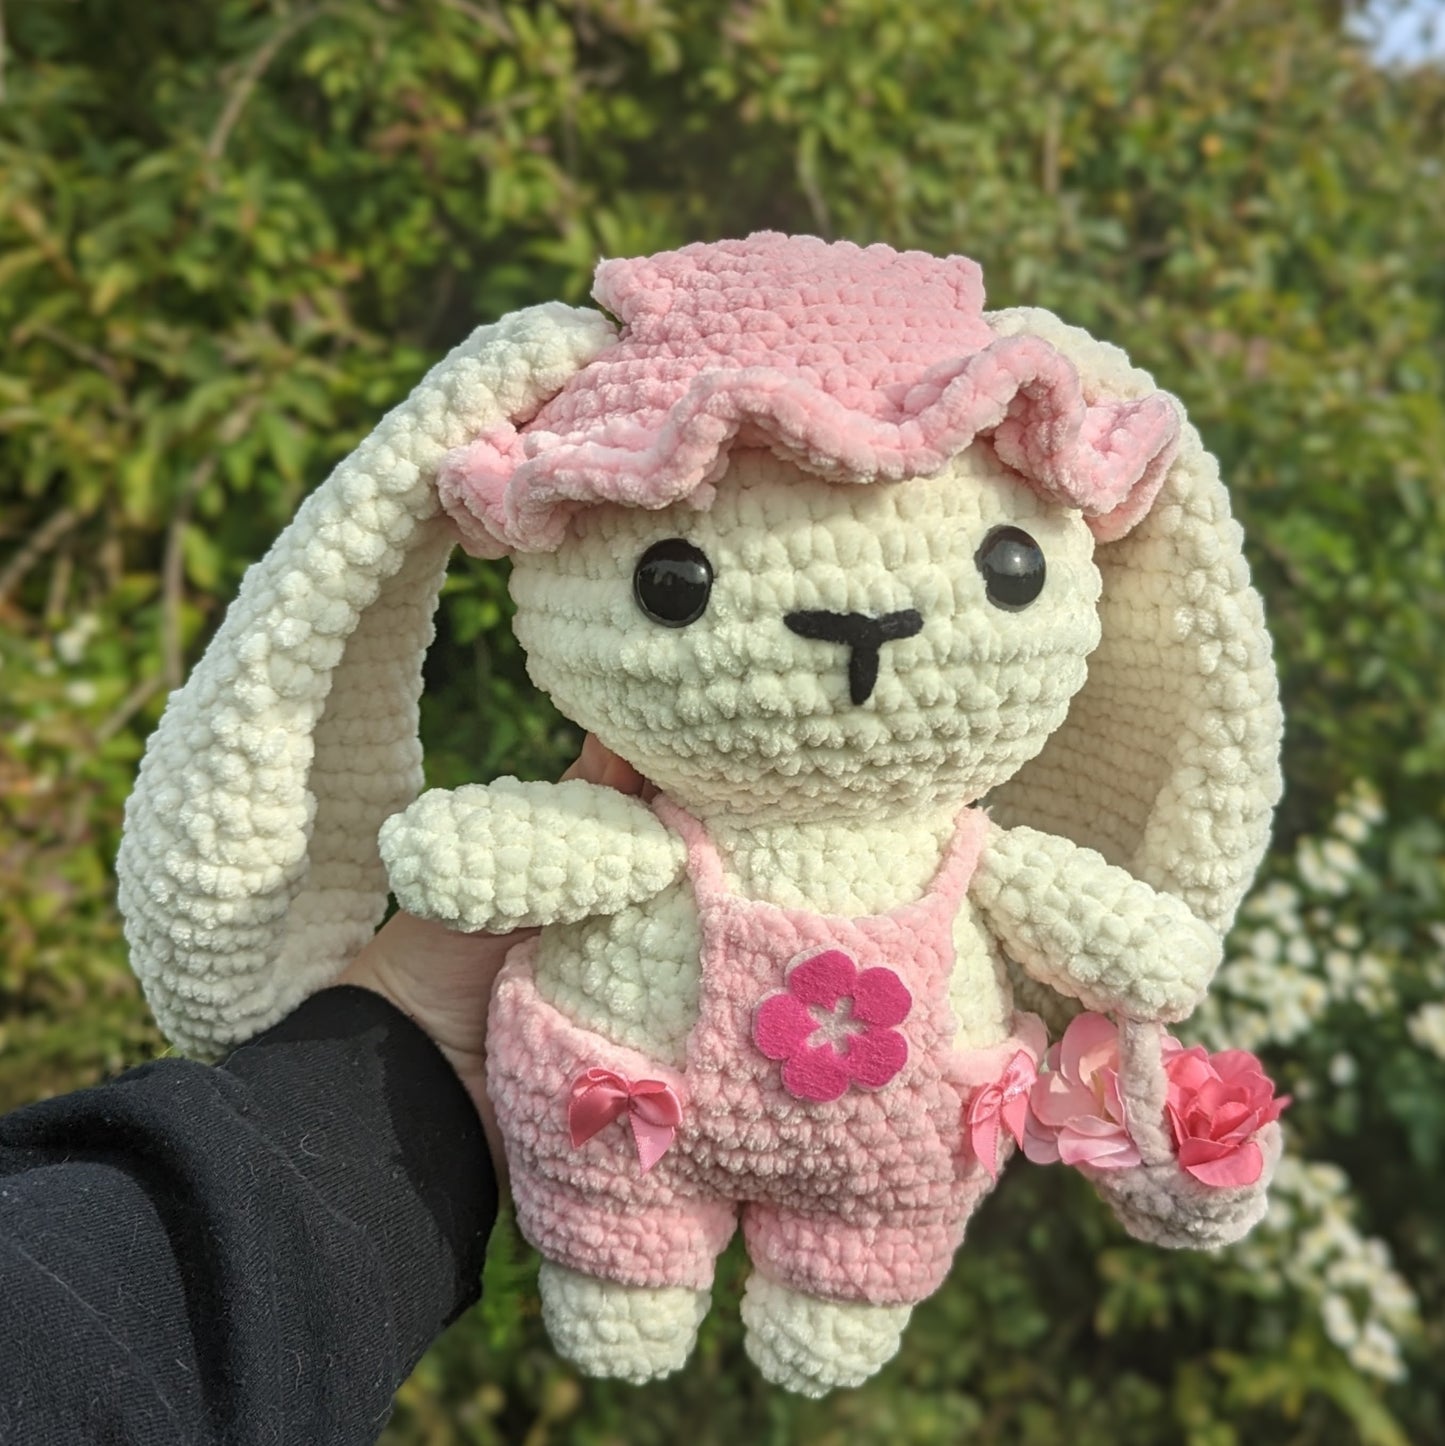 Blossom Bunny in Overalls Crochet Pattern // NOT PHYSICAL ITEM